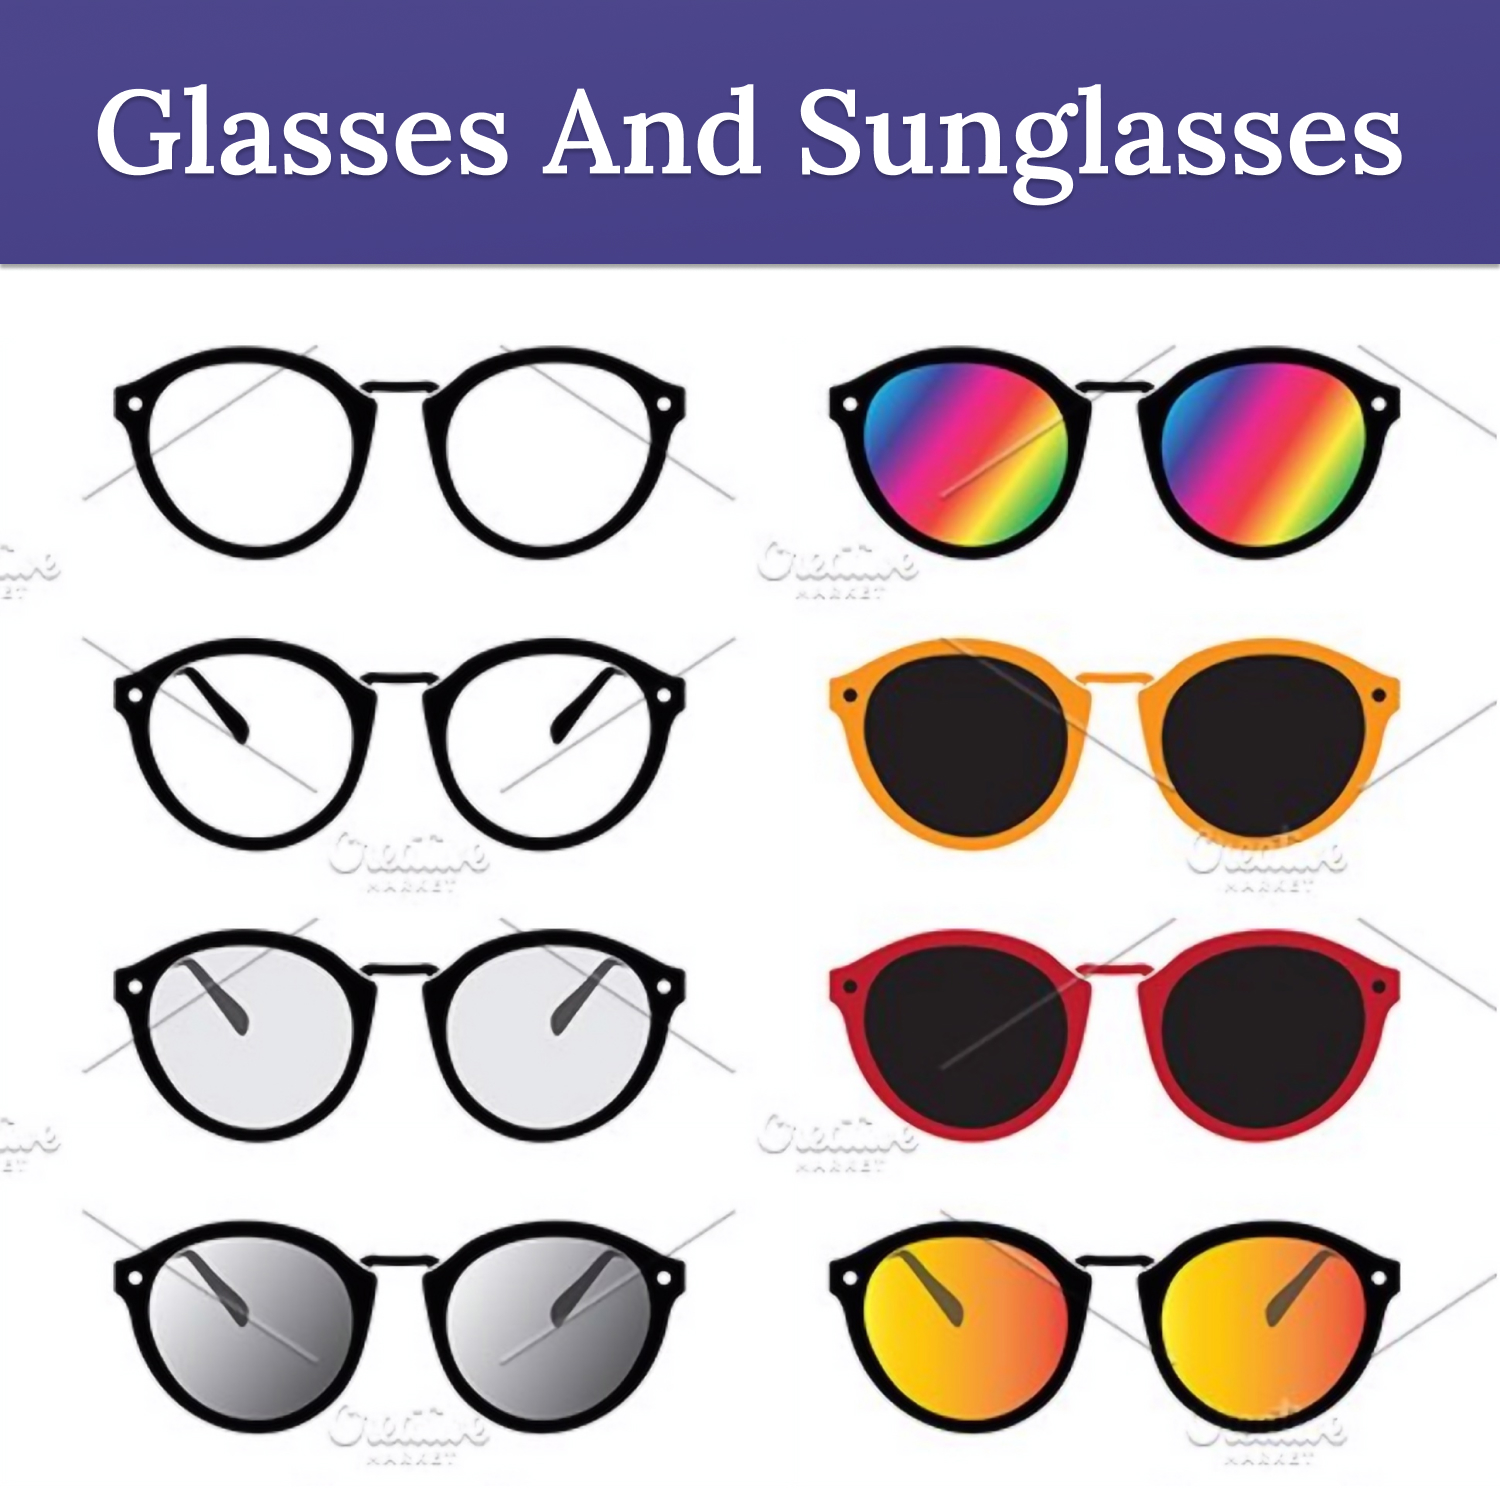 Images preview group of an glasses and sunglasses.